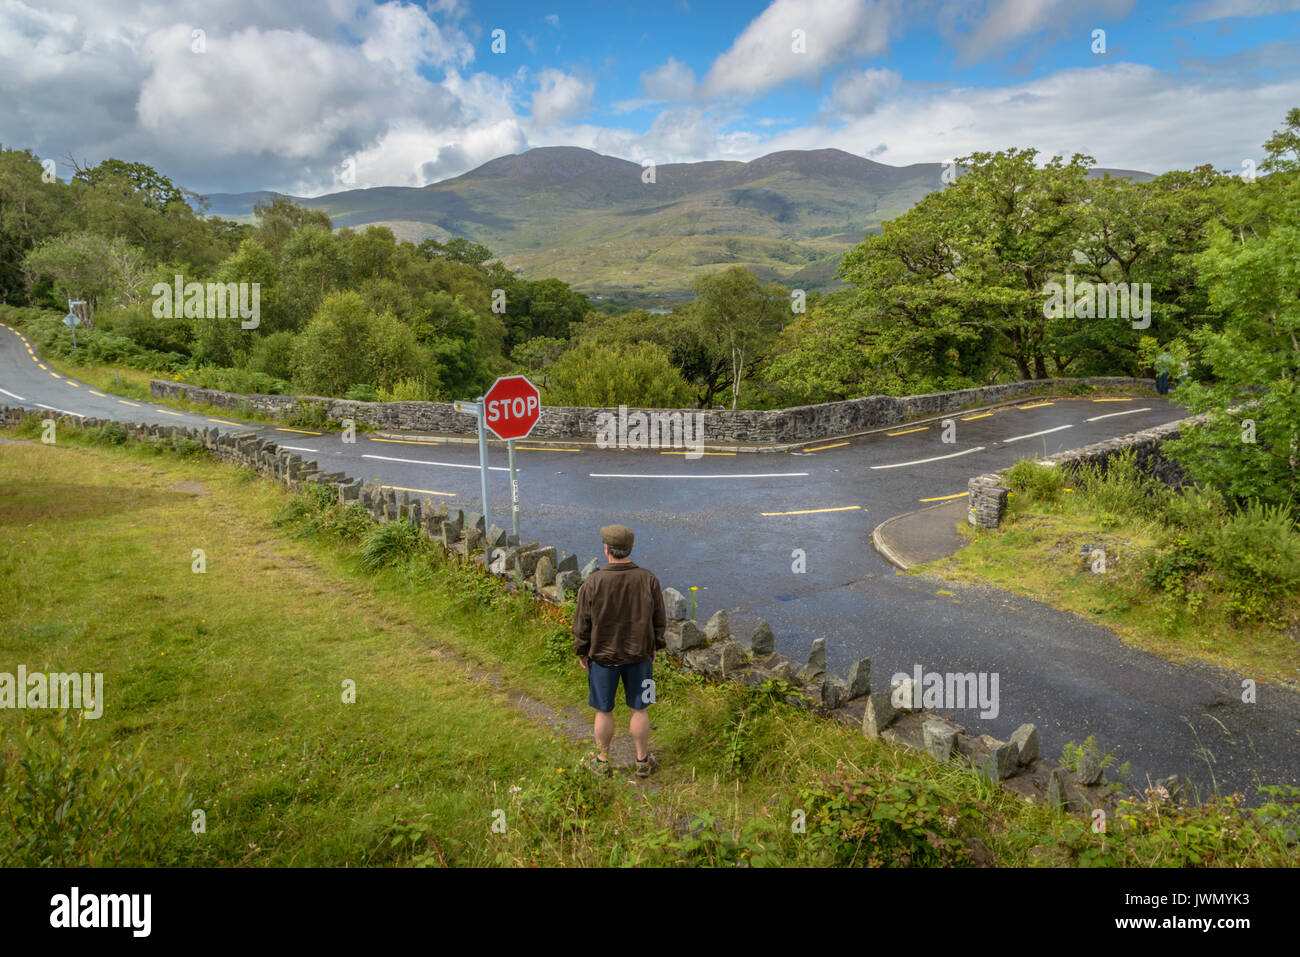 Ireland Mountains Roadway and Fork in the Road Stock Photo